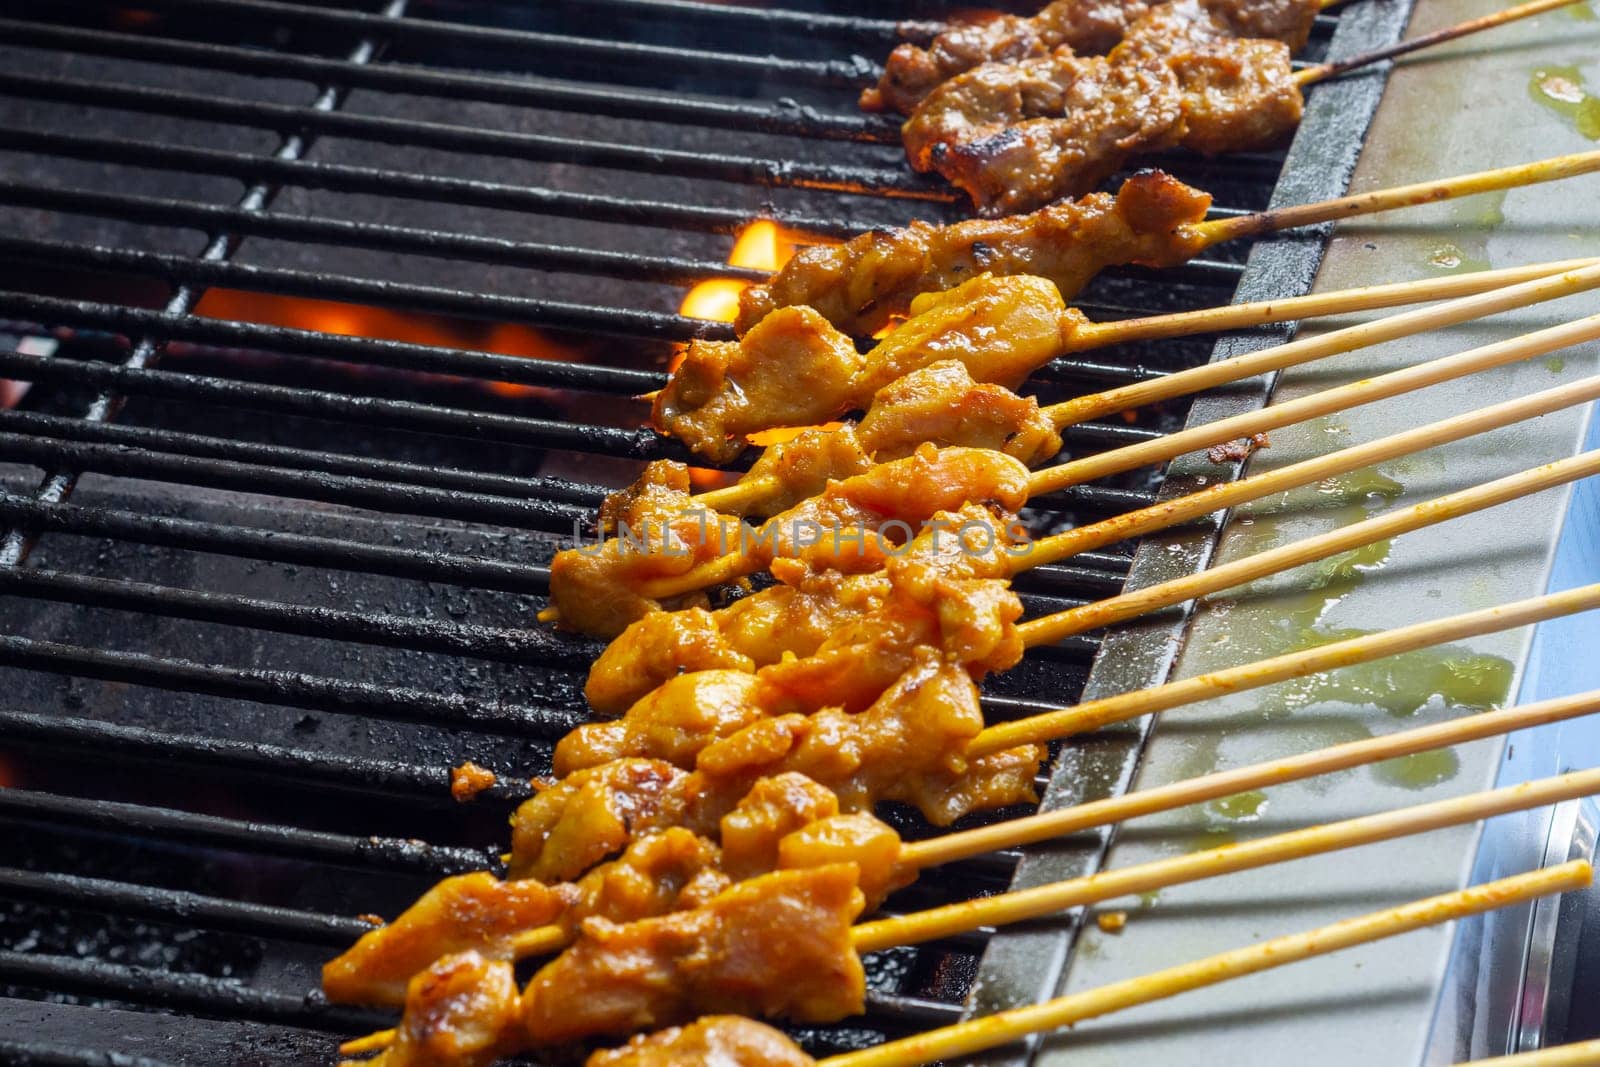 Asian cuisine, Malaysia chicken satay cooking on a hot charcoal grill. Food concept.